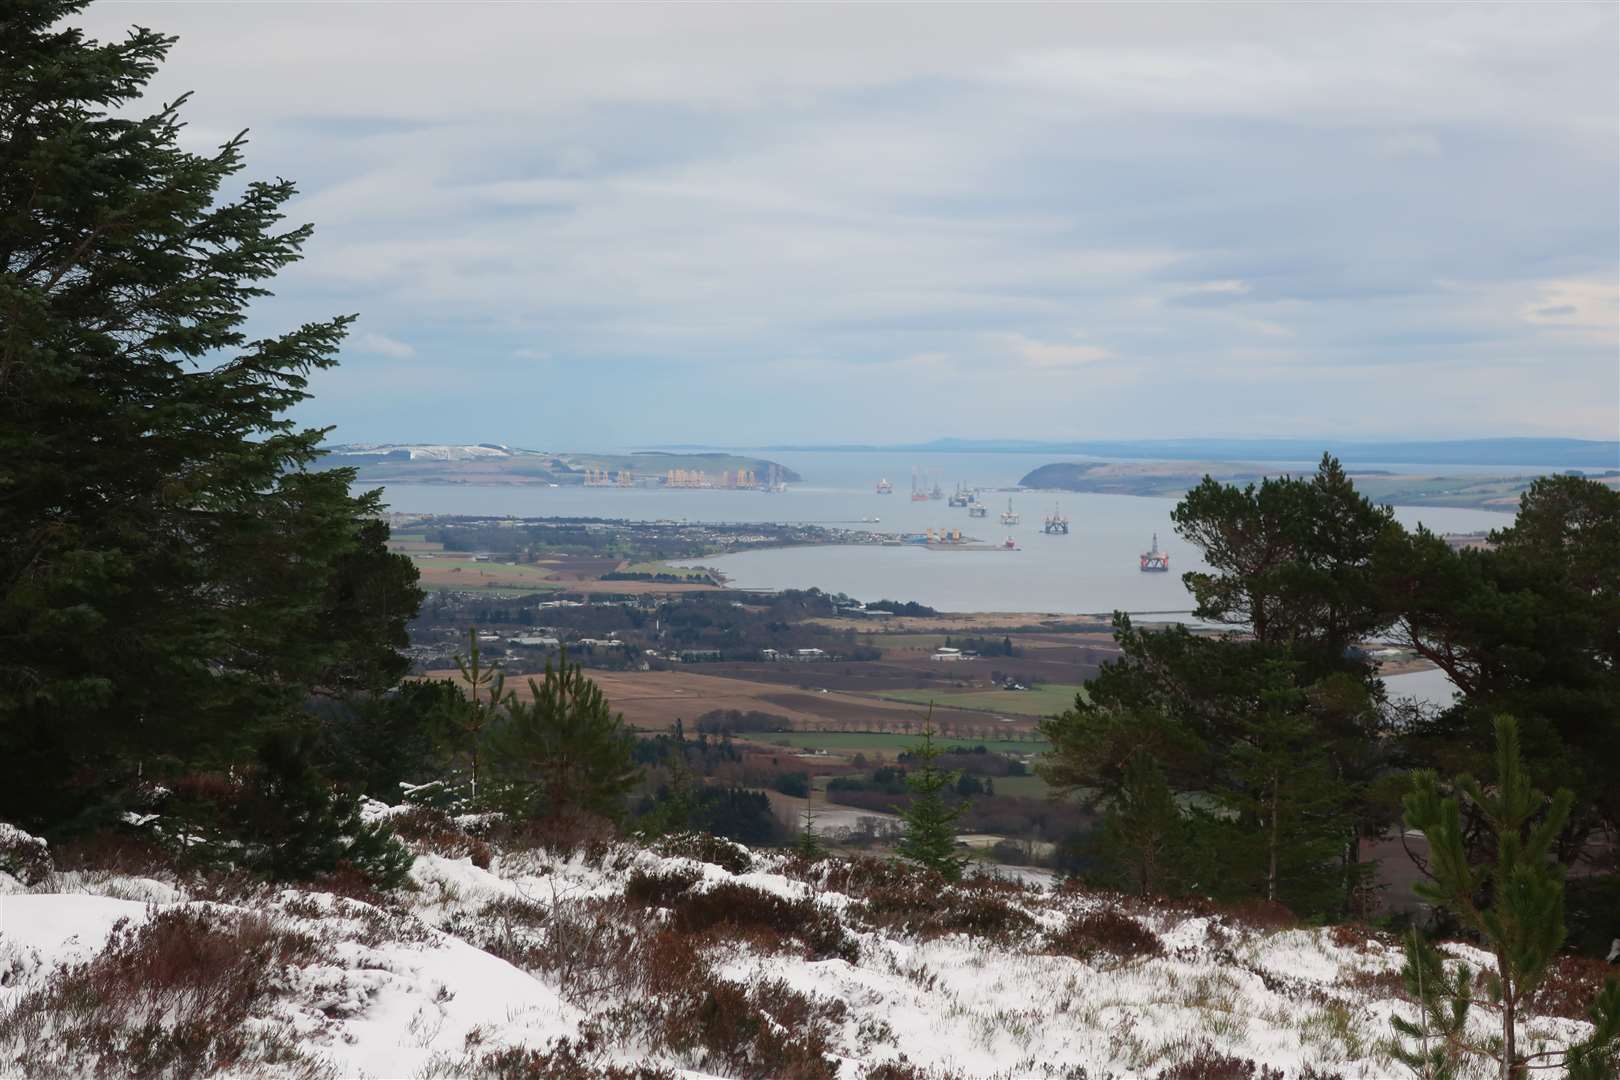 Overlooking the Cromarty Firth - complete with oil rigs and jackets for wind turbines - from the top track on Creag Ruadh.